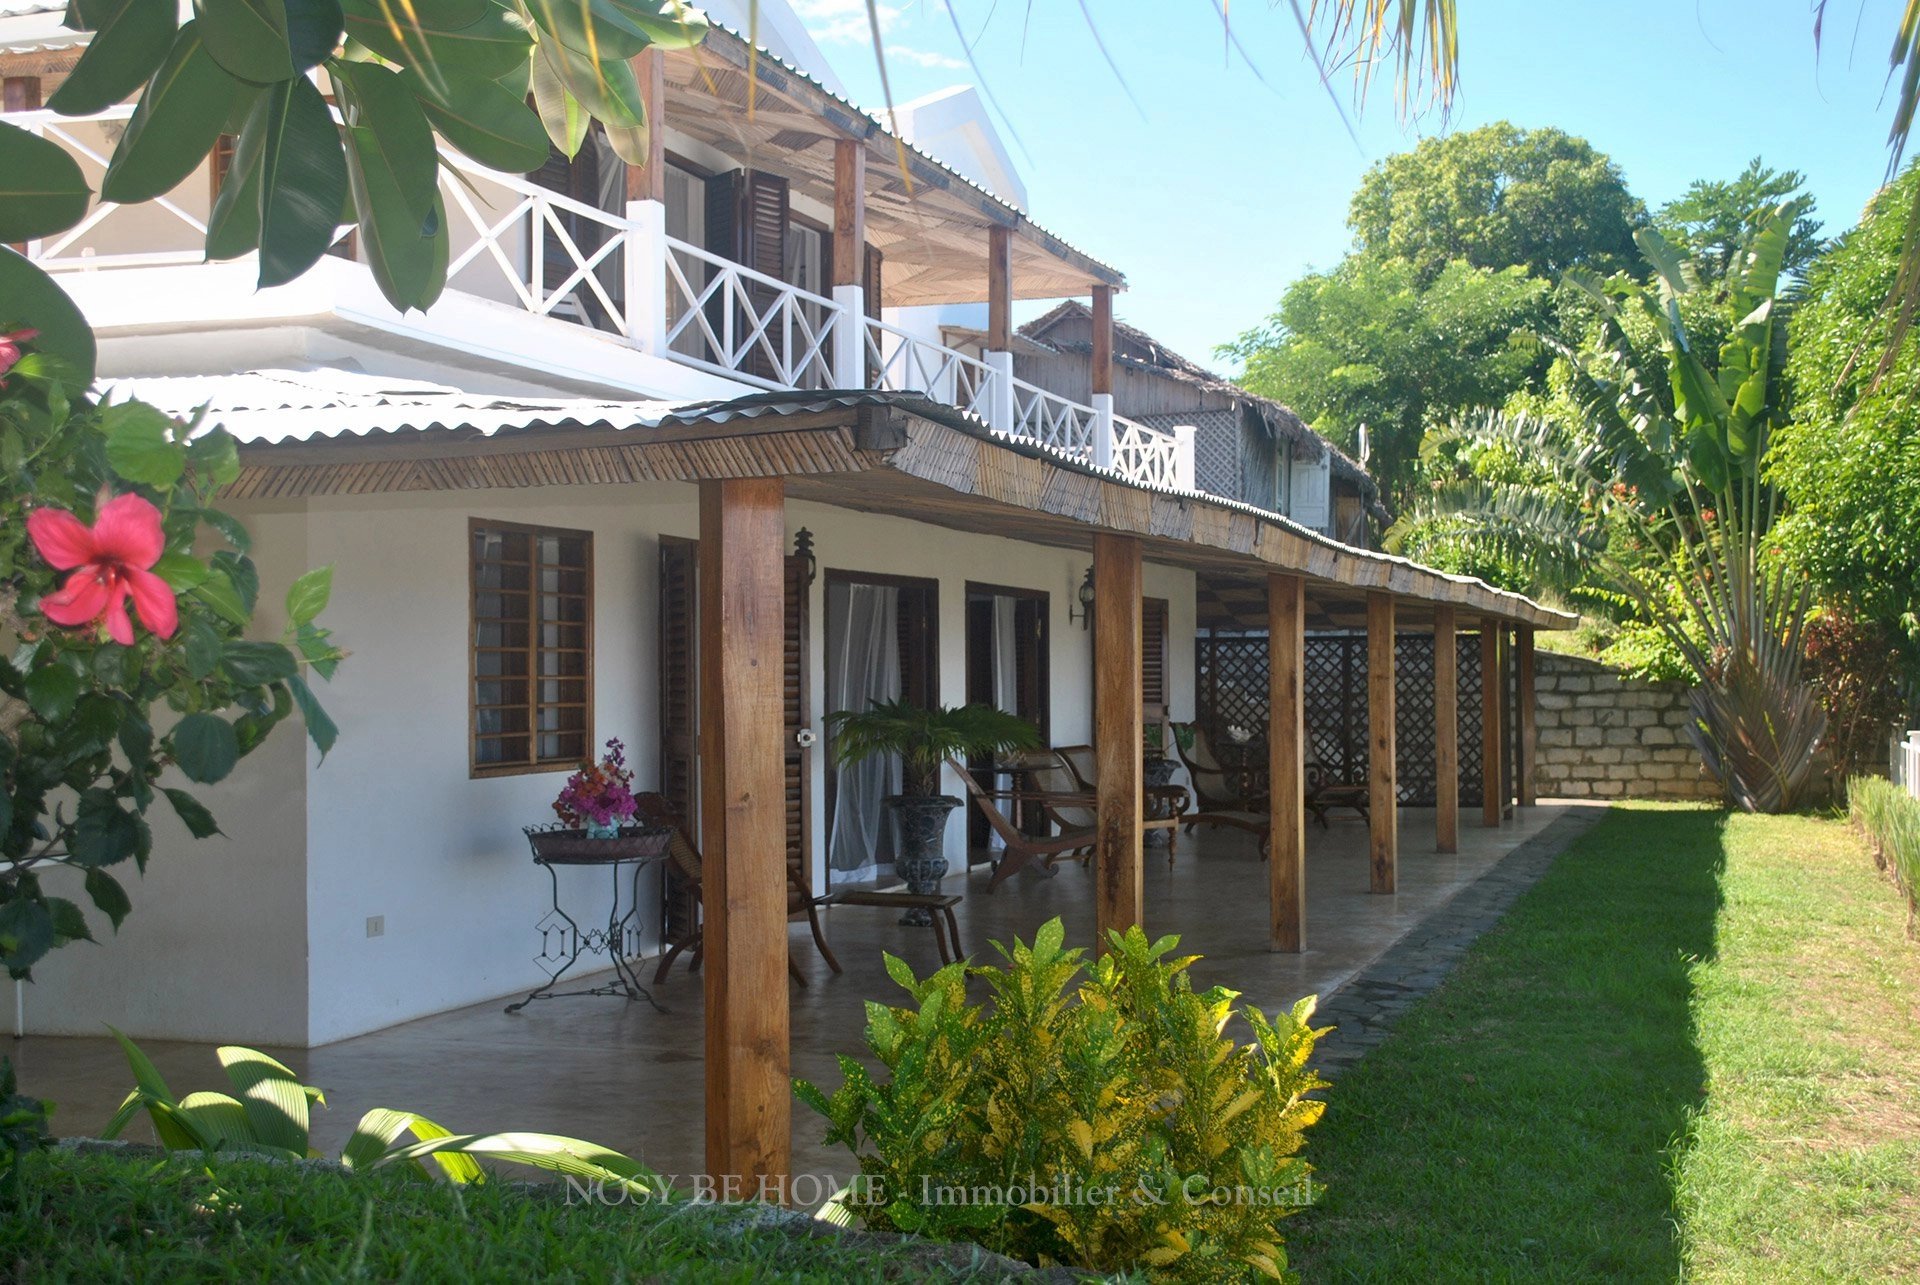 Sale Bed and breakfast - Nosy Be - Madagascar